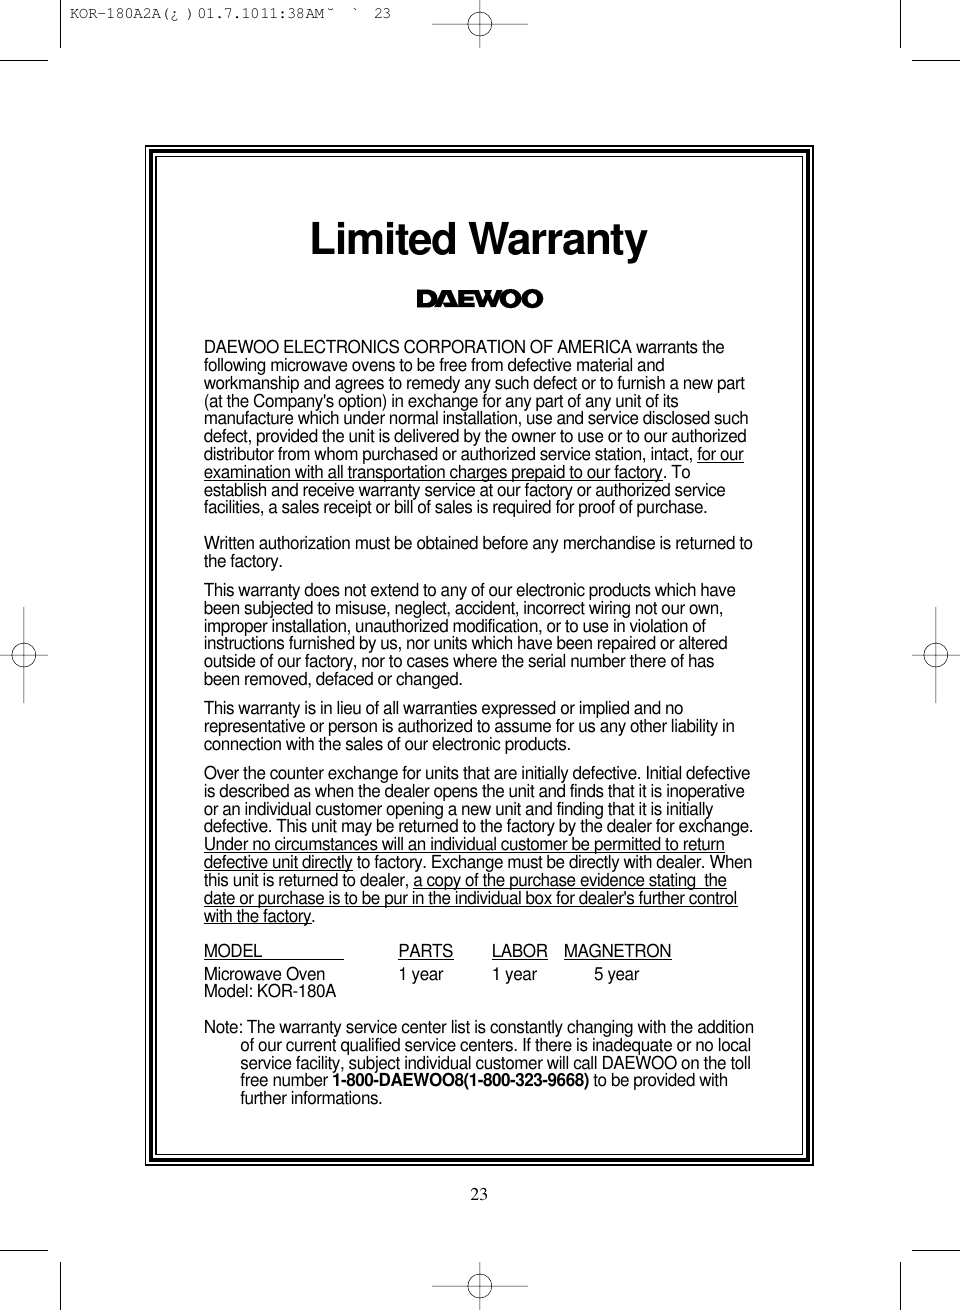 23Limited WarrantyDAEWOO ELECTRONICS CORPORATION OF AMERICA warrants thefollowing microwave ovens to be free from defective material andworkmanship and agrees to remedy any such defect or to furnish a new part(at the Company&apos;s option) in exchange for any part of any unit of itsmanufacture which under normal installation, use and service disclosed suchdefect, provided the unit is delivered by the owner to use or to our authorizeddistributor from whom purchased or authorized service station, intact, for ourexamination with all transportation charges prepaid to our factory. Toestablish and receive warranty service at our factory or authorized servicefacilities, a sales receipt or bill of sales is required for proof of purchase.Written authorization must be obtained before any merchandise is returned tothe factory.This warranty does not extend to any of our electronic products which havebeen subjected to misuse, neglect, accident, incorrect wiring not our own,improper installation, unauthorized modification, or to use in violation ofinstructions furnished by us, nor units which have been repaired or alteredoutside of our factory, nor to cases where the serial number there of hasbeen removed, defaced or changed.This warranty is in lieu of all warranties expressed or implied and norepresentative or person is authorized to assume for us any other liability inconnection with the sales of our electronic products.Over the counter exchange for units that are initially defective. Initial defectiveis described as when the dealer opens the unit and finds that it is inoperativeor an individual customer opening a new unit and finding that it is initiallydefective. This unit may be returned to the factory by the dealer for exchange.Under no circumstances will an individual customer be permitted to returndefective unit directly to factory. Exchange must be directly with dealer. Whenthis unit is returned to dealer, a copy of the purchase evidence stating  thedate or purchase is to be pur in the individual box for dealer&apos;s further controlwith the factory.MODEL                    PARTS LABOR MAGNETRONMicrowave Oven 1 year 1 year 5 yearModel: KOR-180ANote: The warranty service center list is constantly changing with the additionof our current qualified service centers. If there is inadequate or no localservice facility, subject individual customer will call DAEWOO on the tollfree number 1-800-DAEWOO8(1-800-323-9668) to be provided withfurther informations. KOR-180A2A(¿ )  01.7.10 11:38 AM  ˘`23